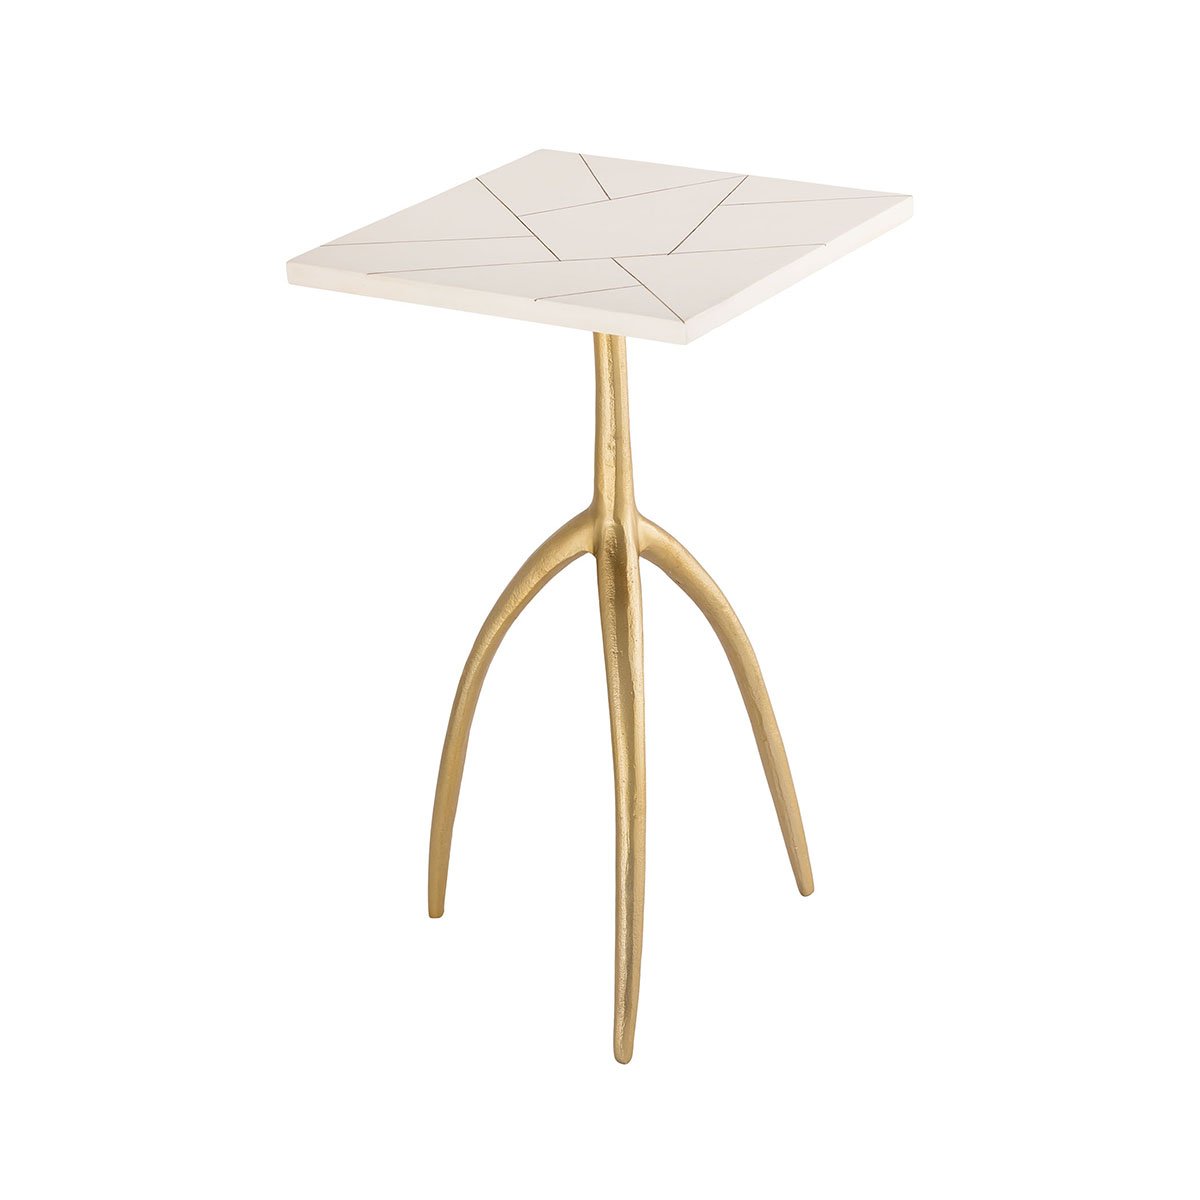 houblon accent table products outdoor umbrella room decoration items white wicker side with glass top oak storage wooden lawn chairs depot furniture granite cocktail affordable